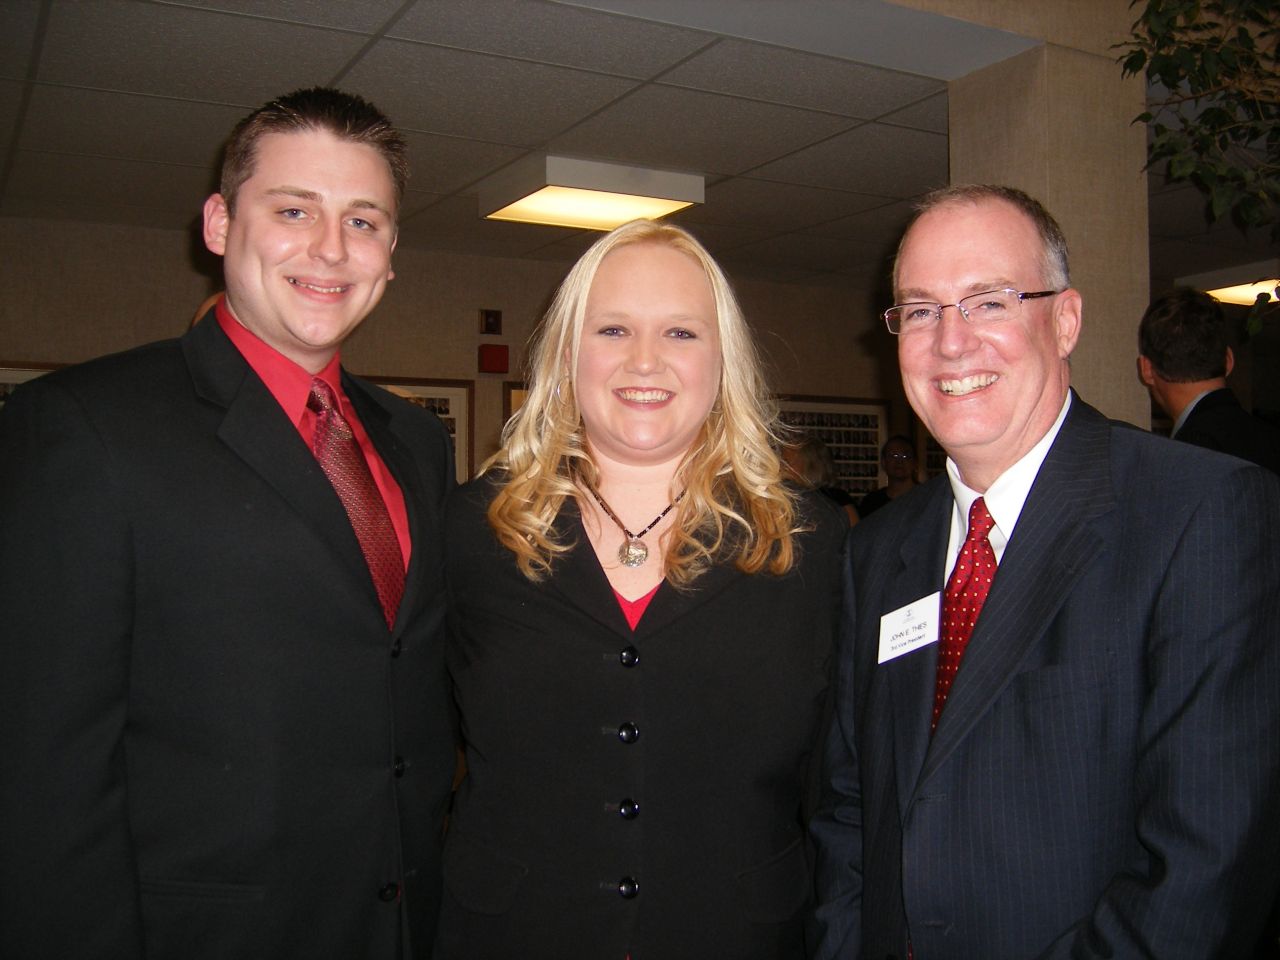 New Admittee Cortney Kuntze (center) with her husband, Paul (left), and ISBA 3rd Vice President Thies